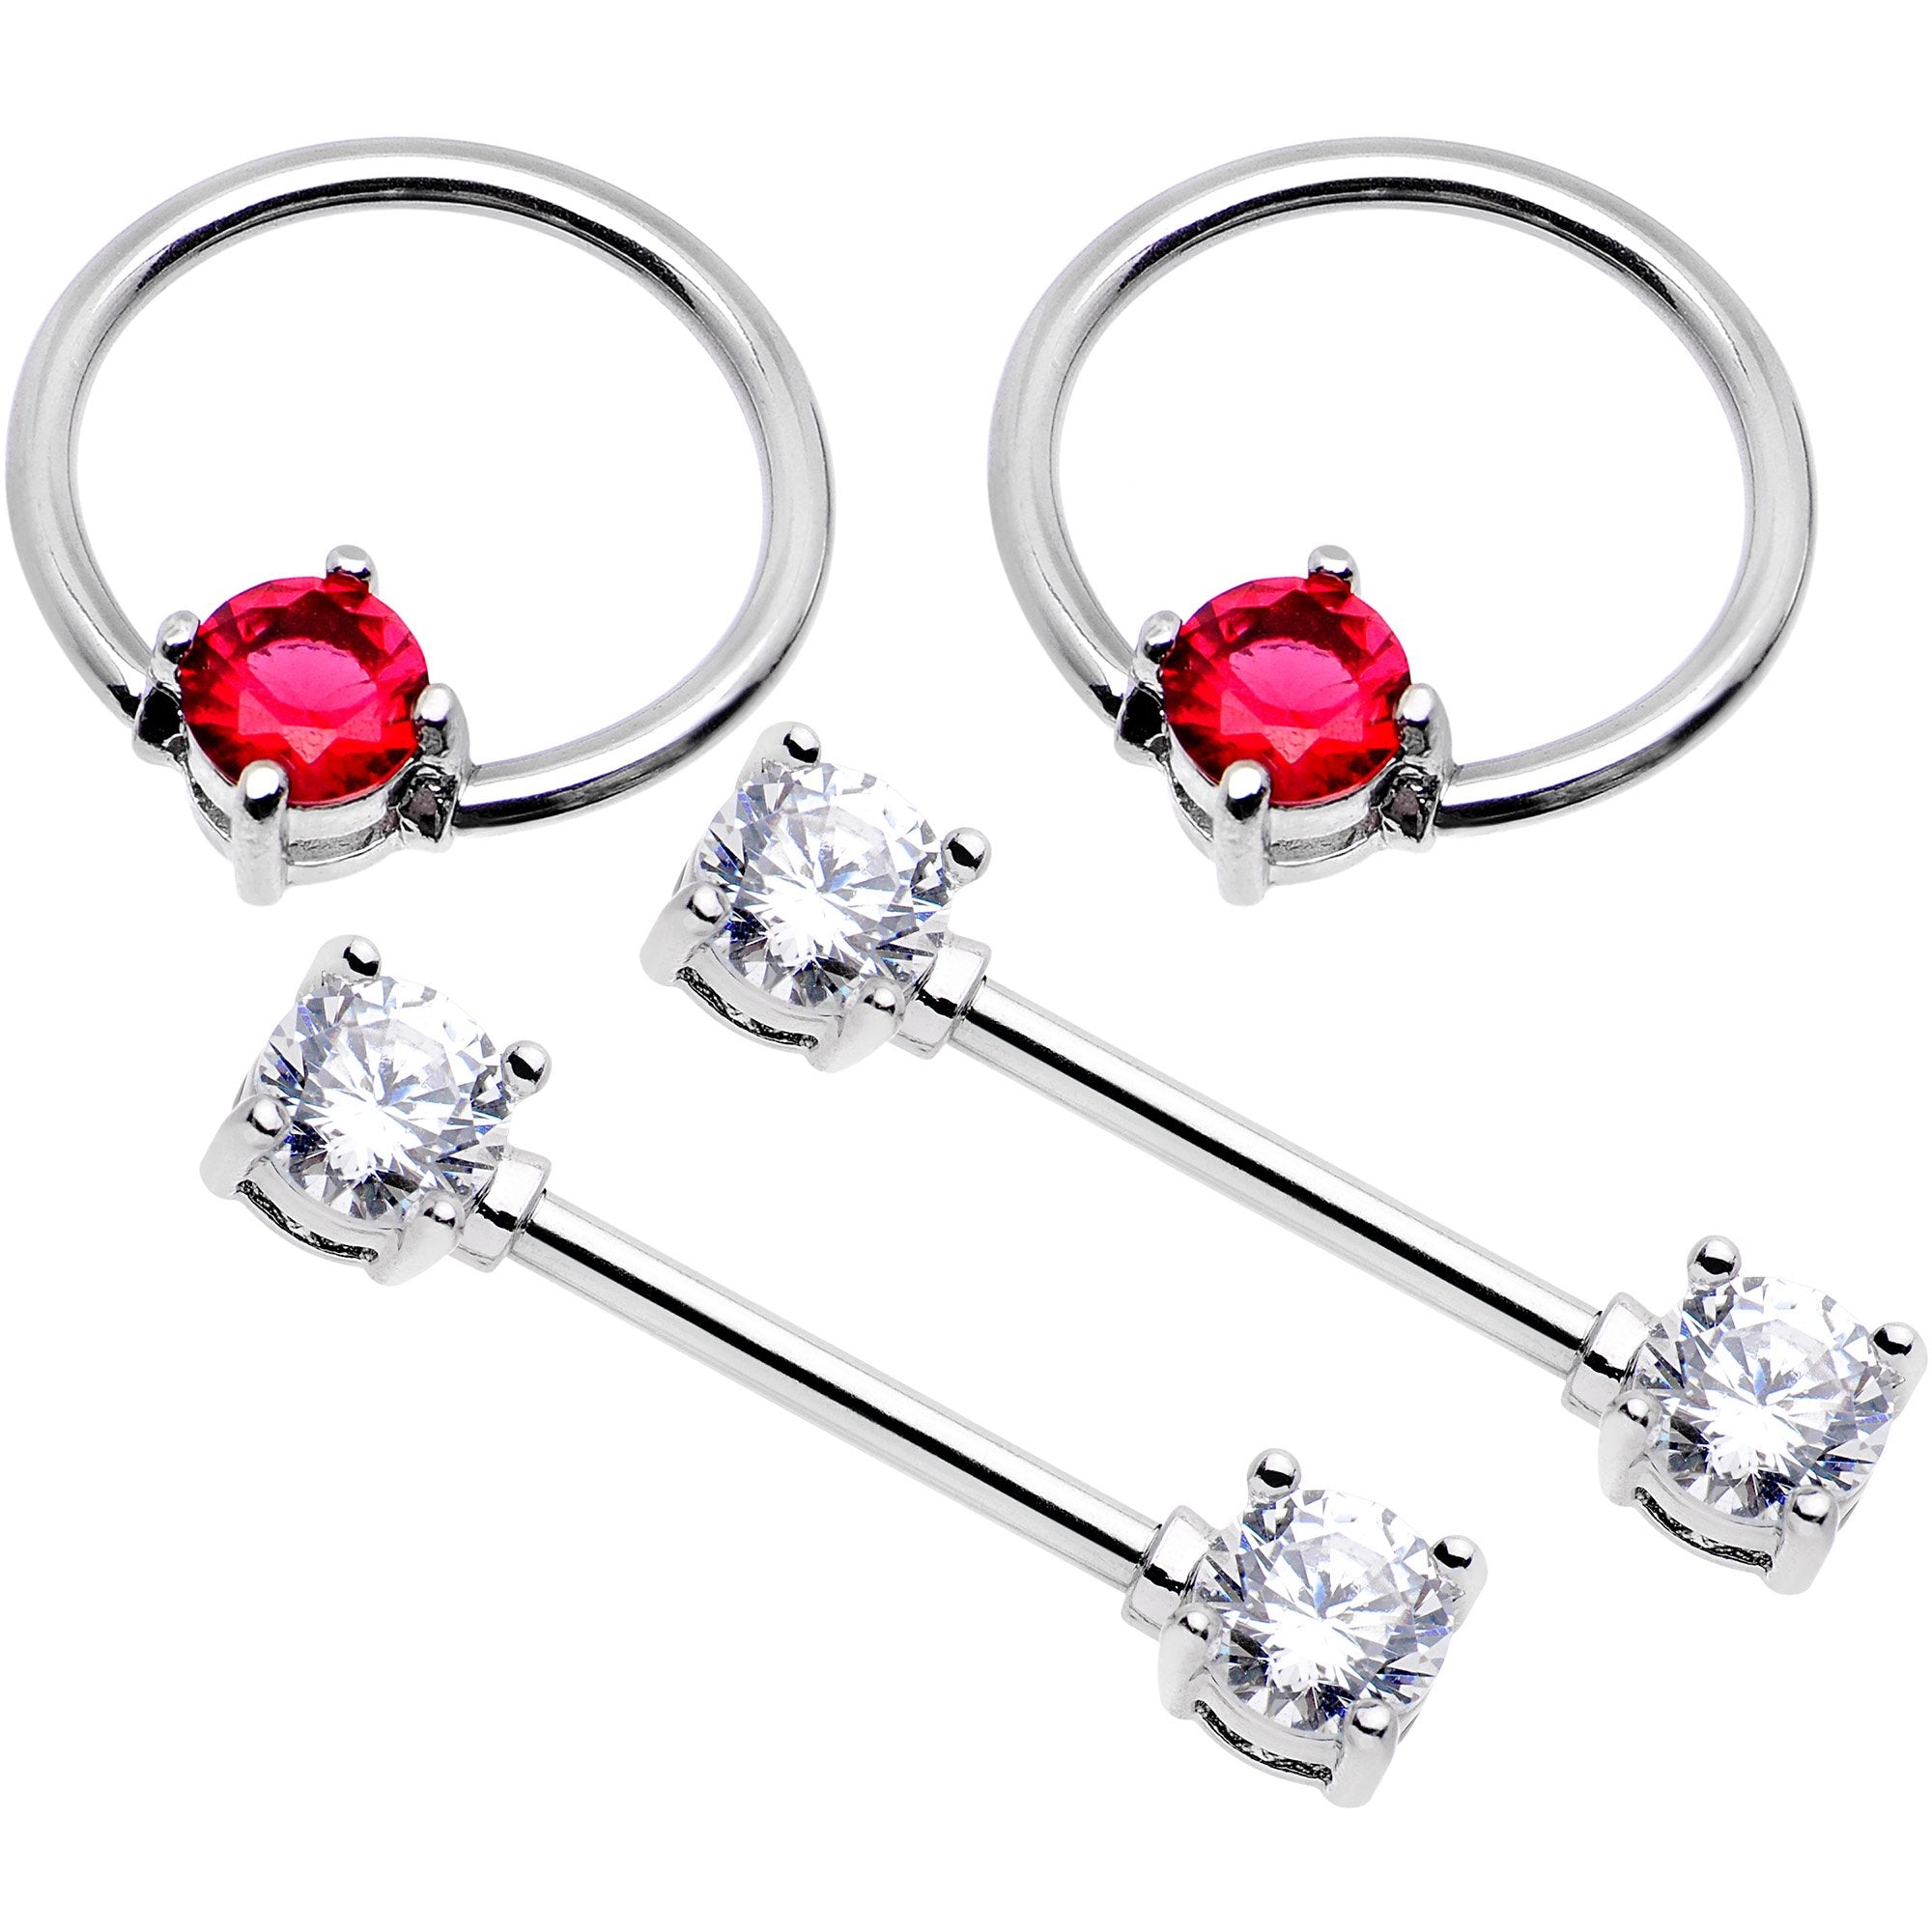 5/8 Clear Pink Gem Captive Ring Straight Barbell Nipple Ring Set